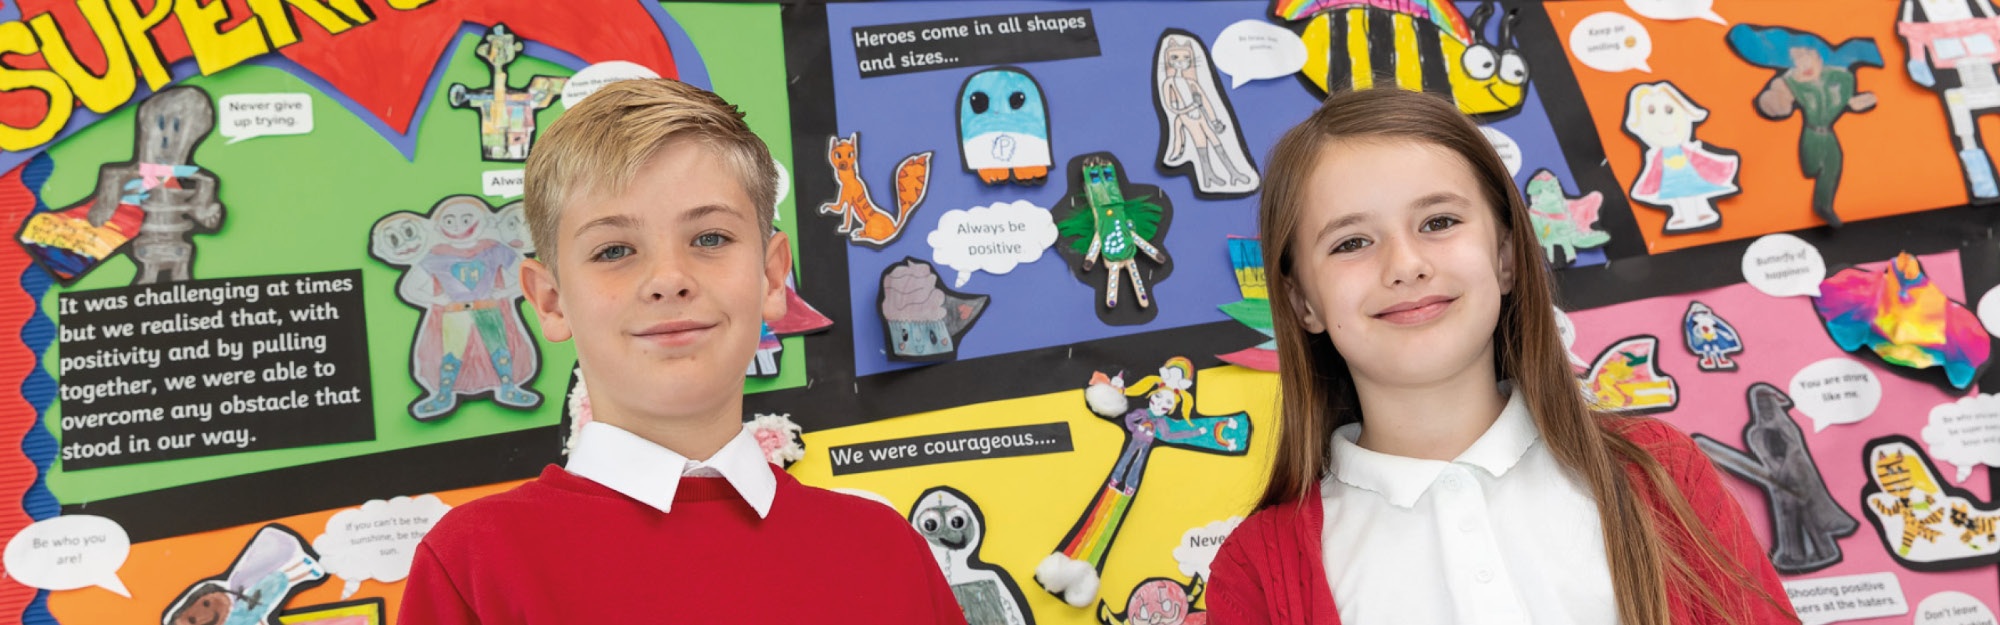 Two Miers Court pupils smile at the camera in front of a display reading "Positivity is our Superpower"